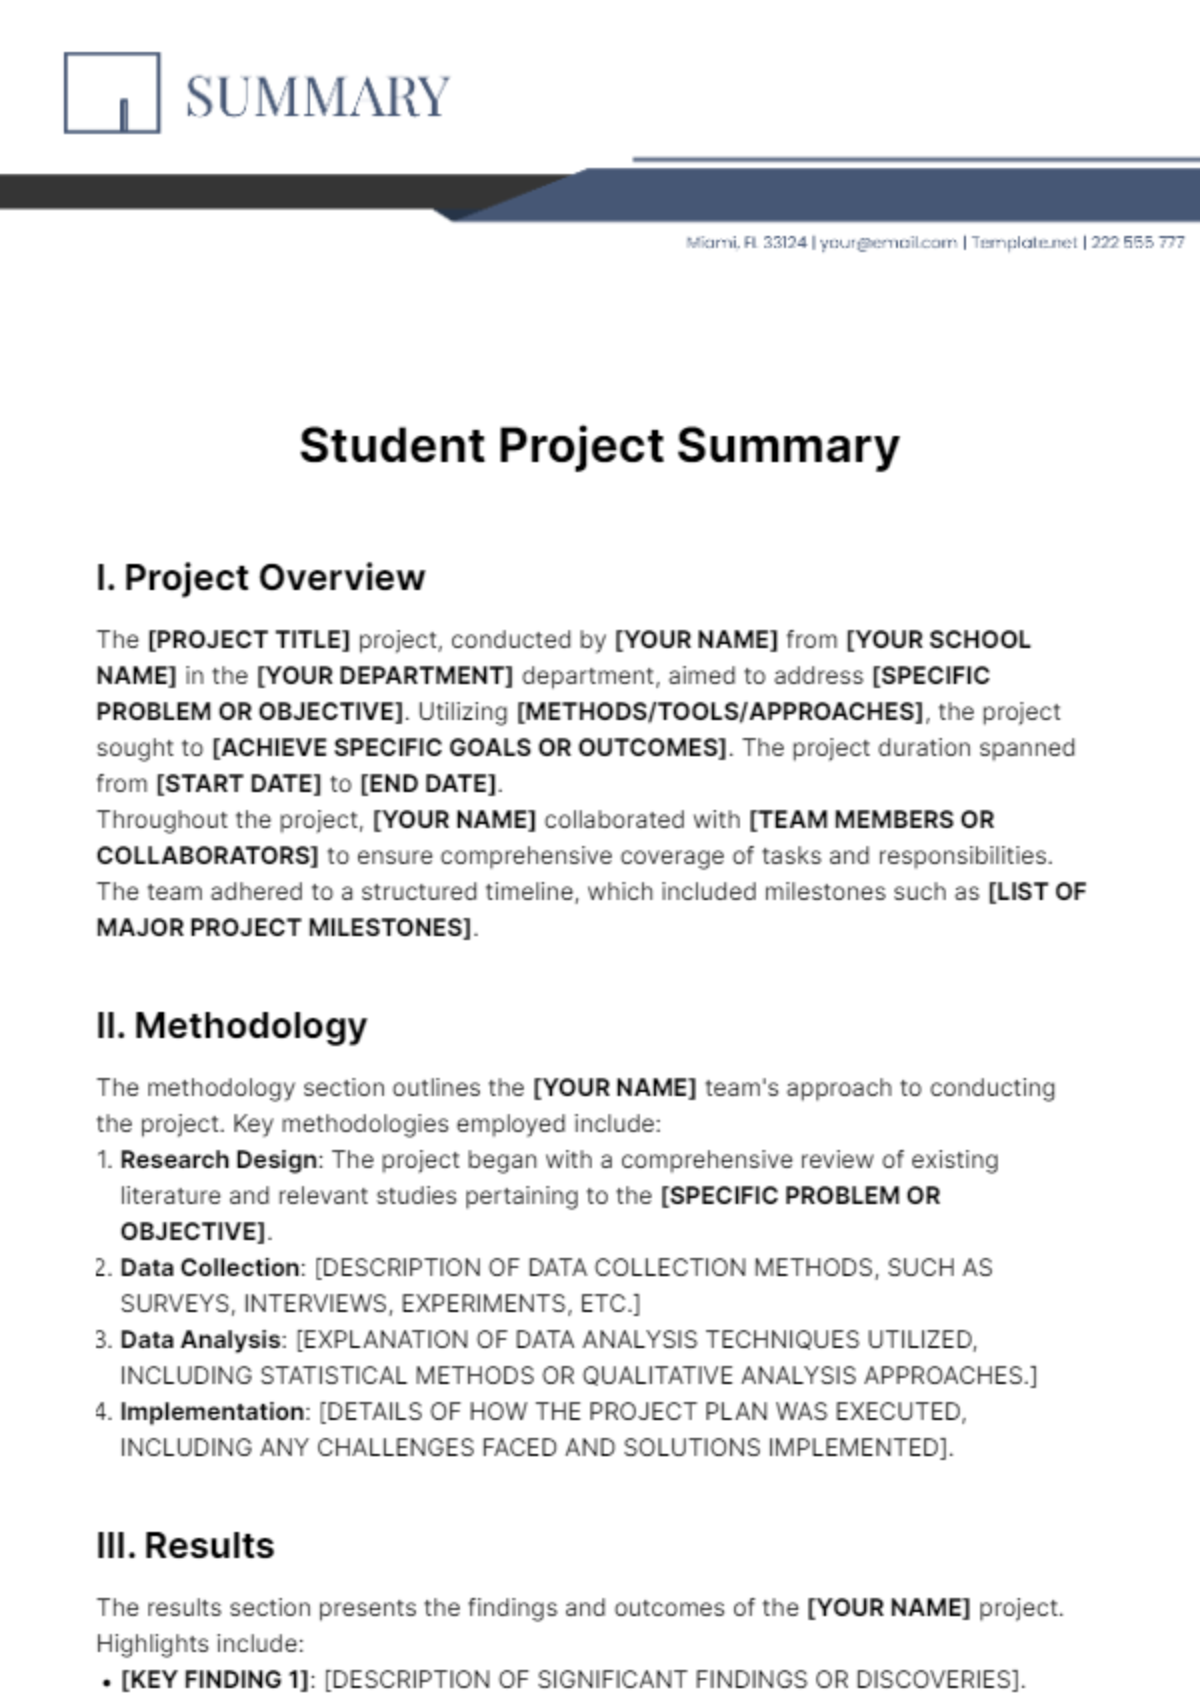 Student Project Summary Template